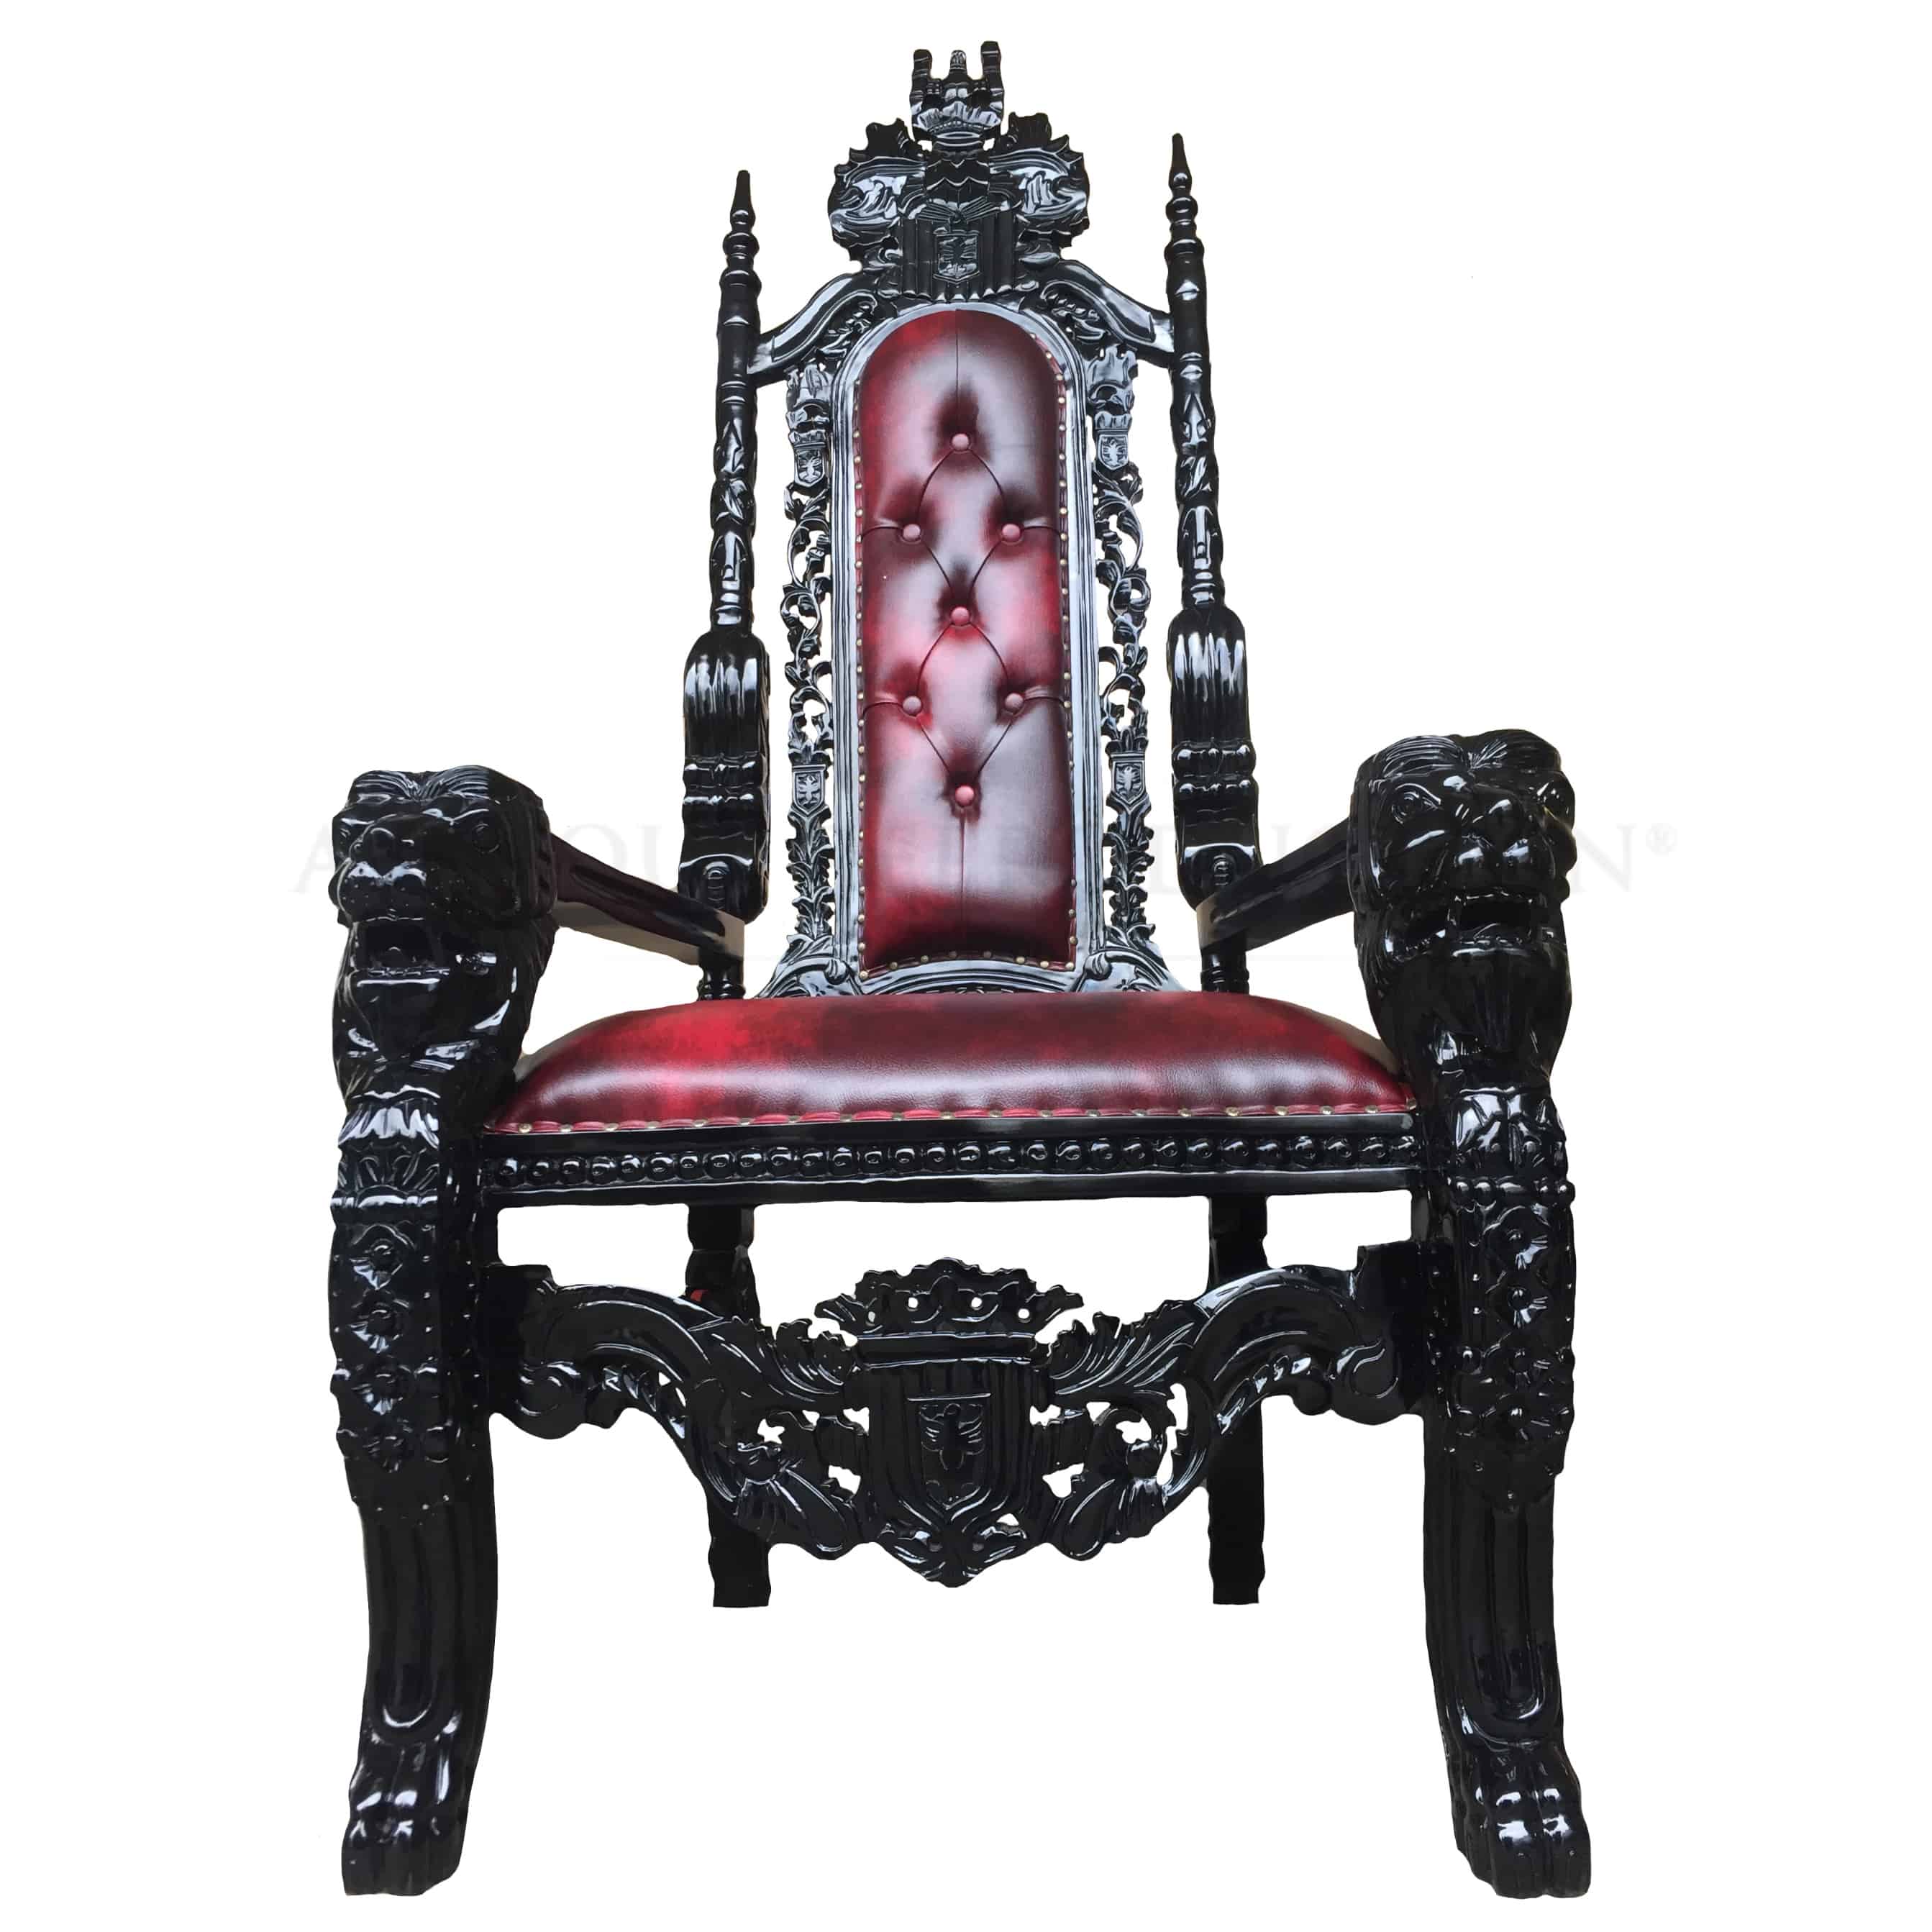 Gothic Black Lion King Throne Chair Antique Reproduction